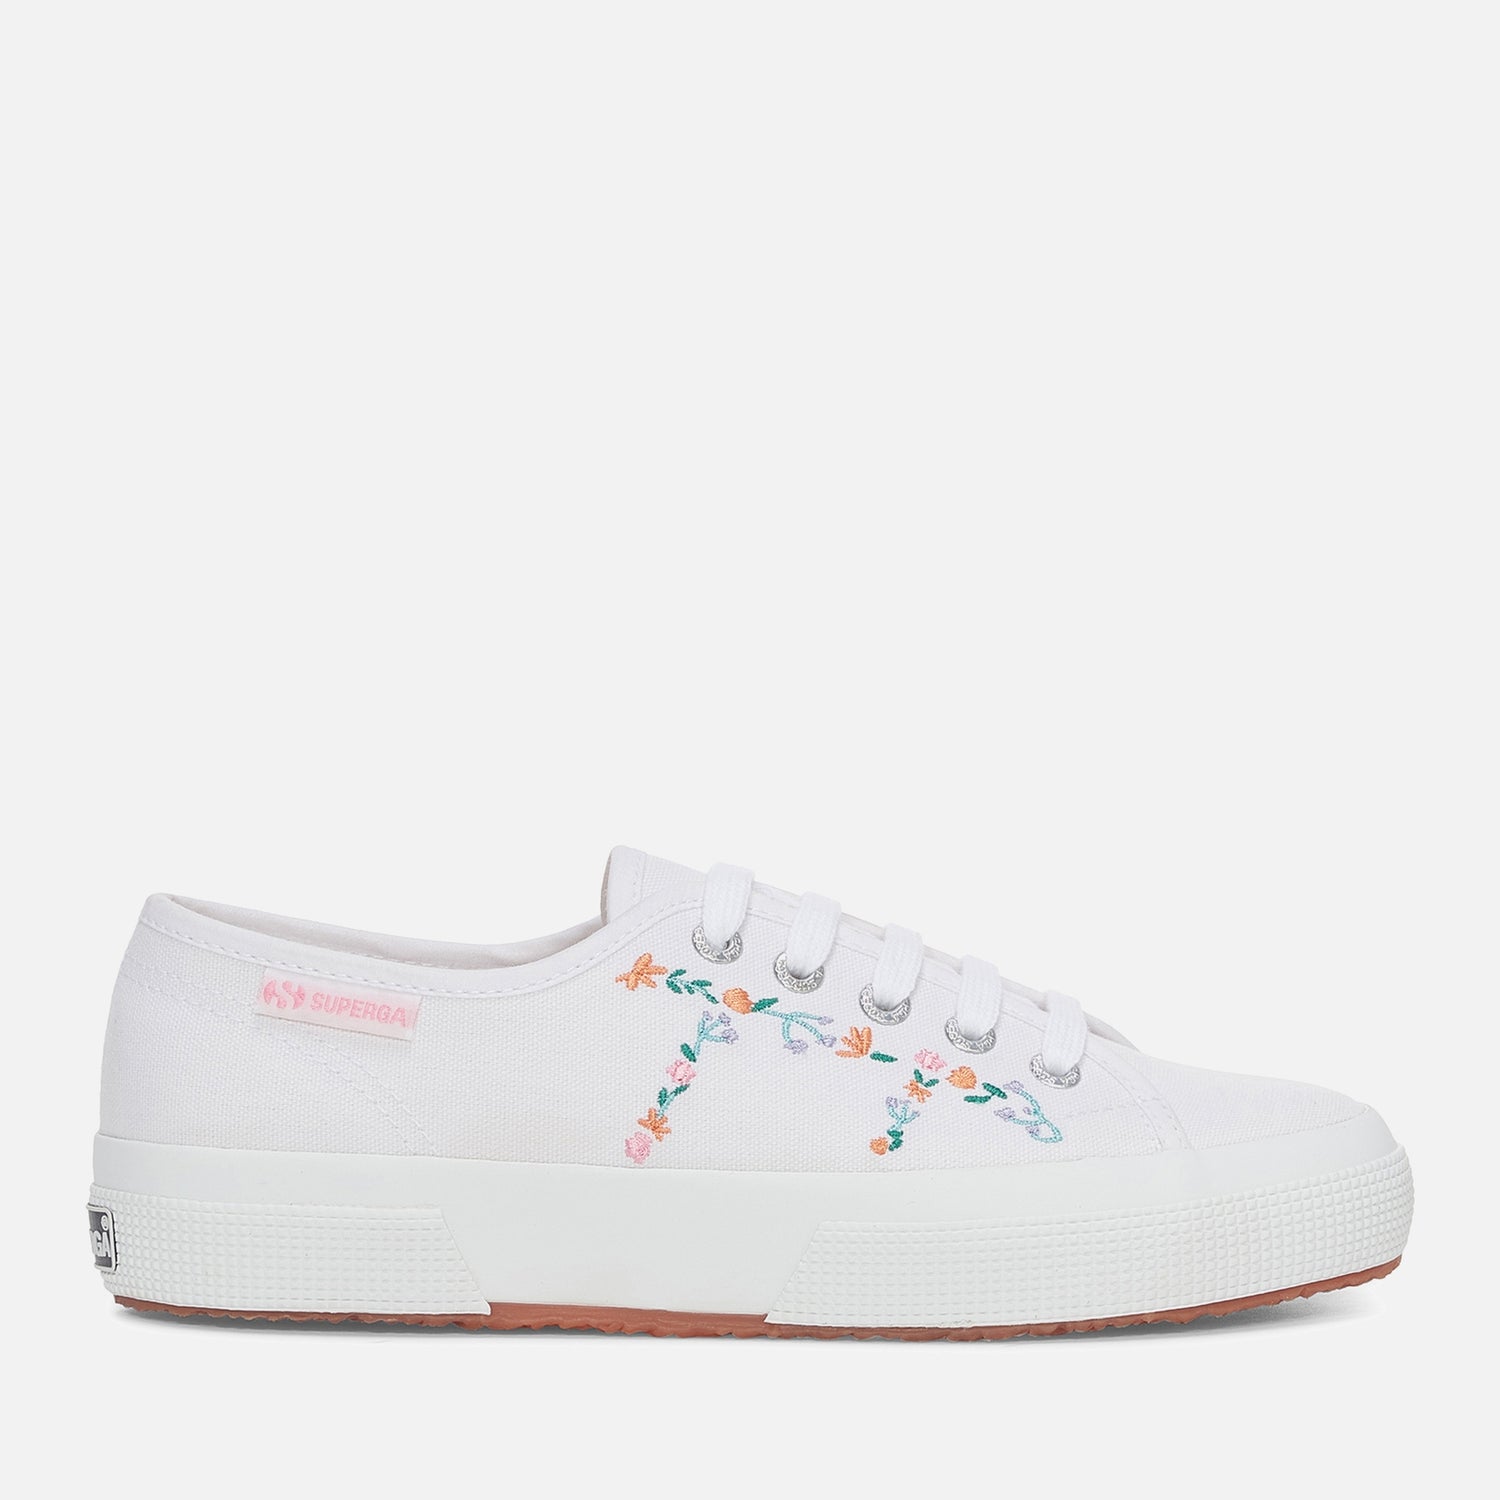 Superga Women's 2750 Floral-Embroidered Canvas Trainers - UK 5